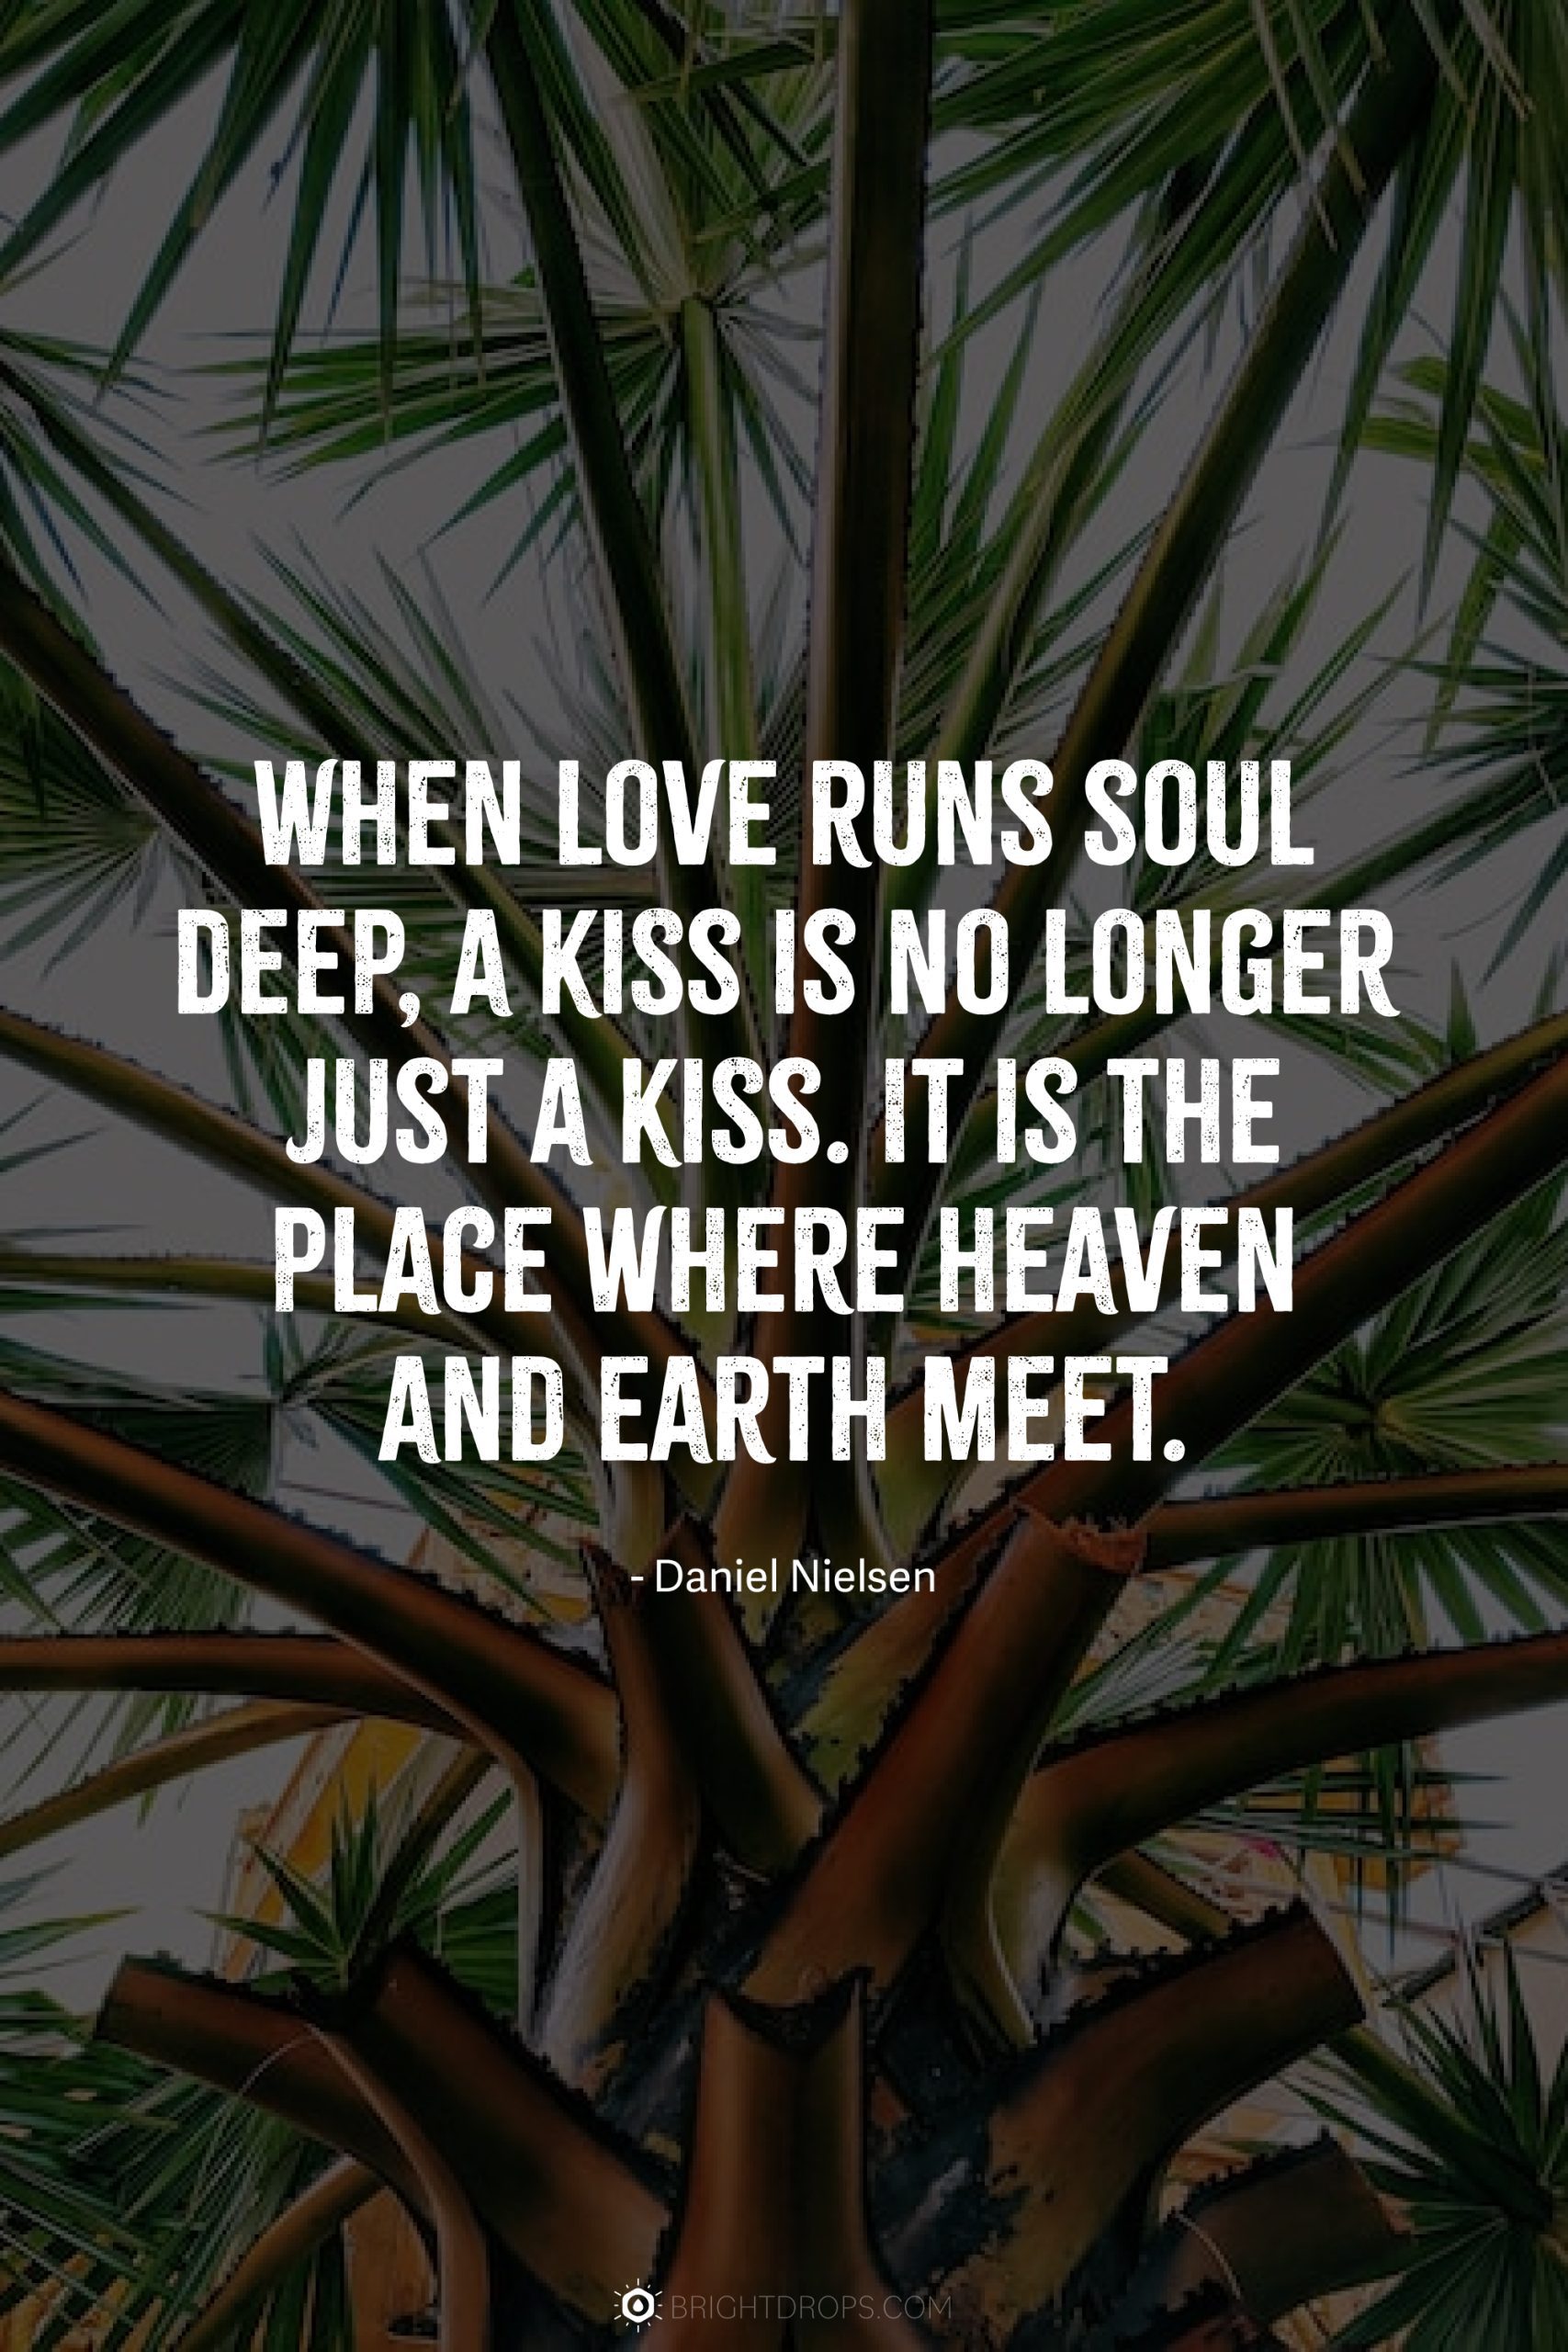 When love runs soul deep, a kiss is no longer just a kiss. It is the place where heaven and earth meet.